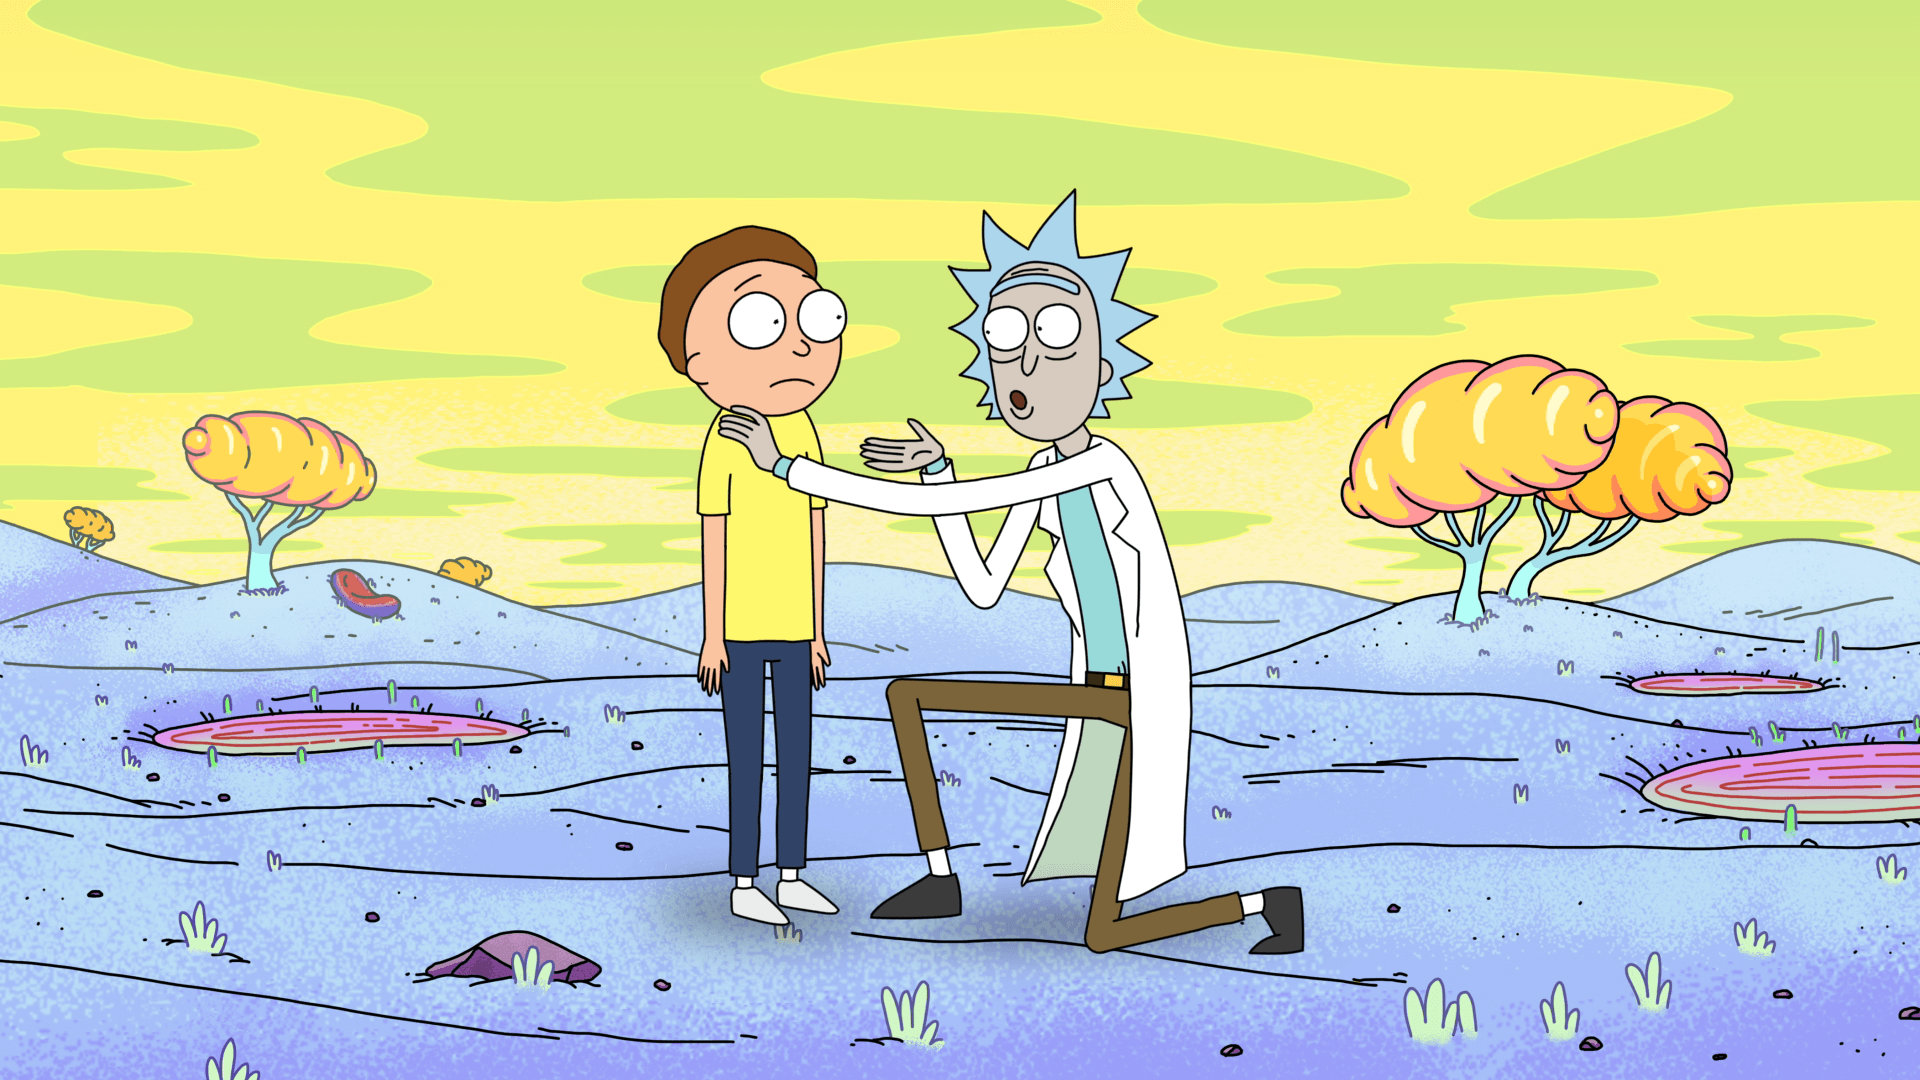 Rick and Morty Computer Wallpapers, Desk 4K Backgrounds